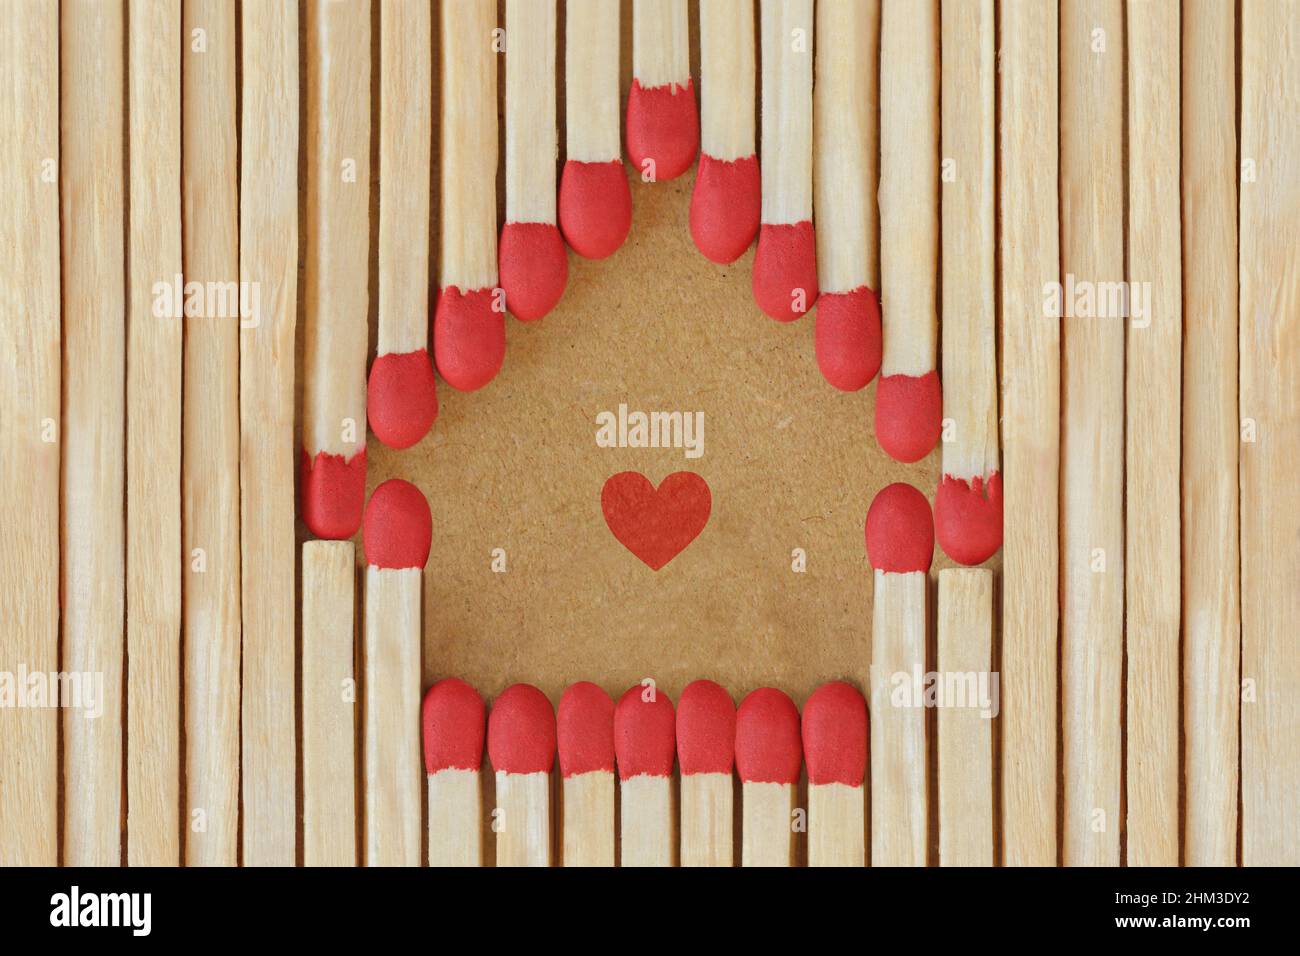 House made of matches with heart on recycled paper background Stock Photo